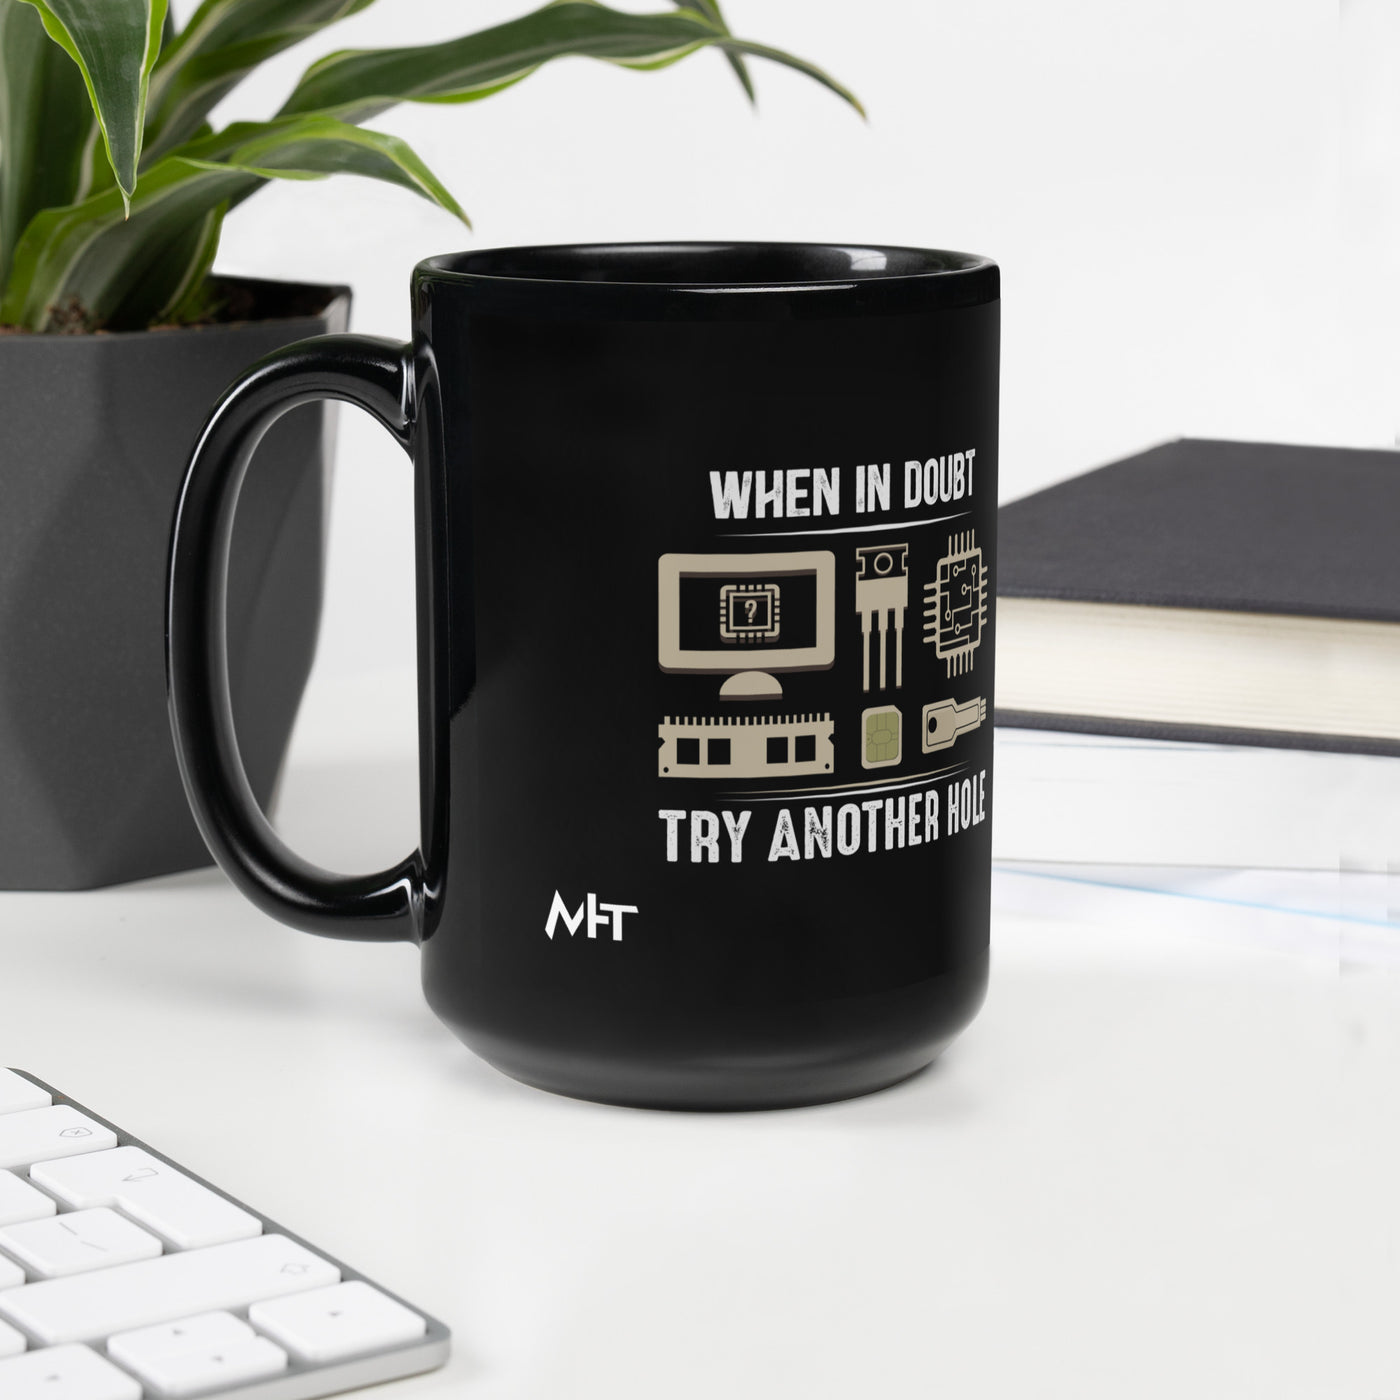 When in doubt, Try another hole V1 - Black Glossy Mug